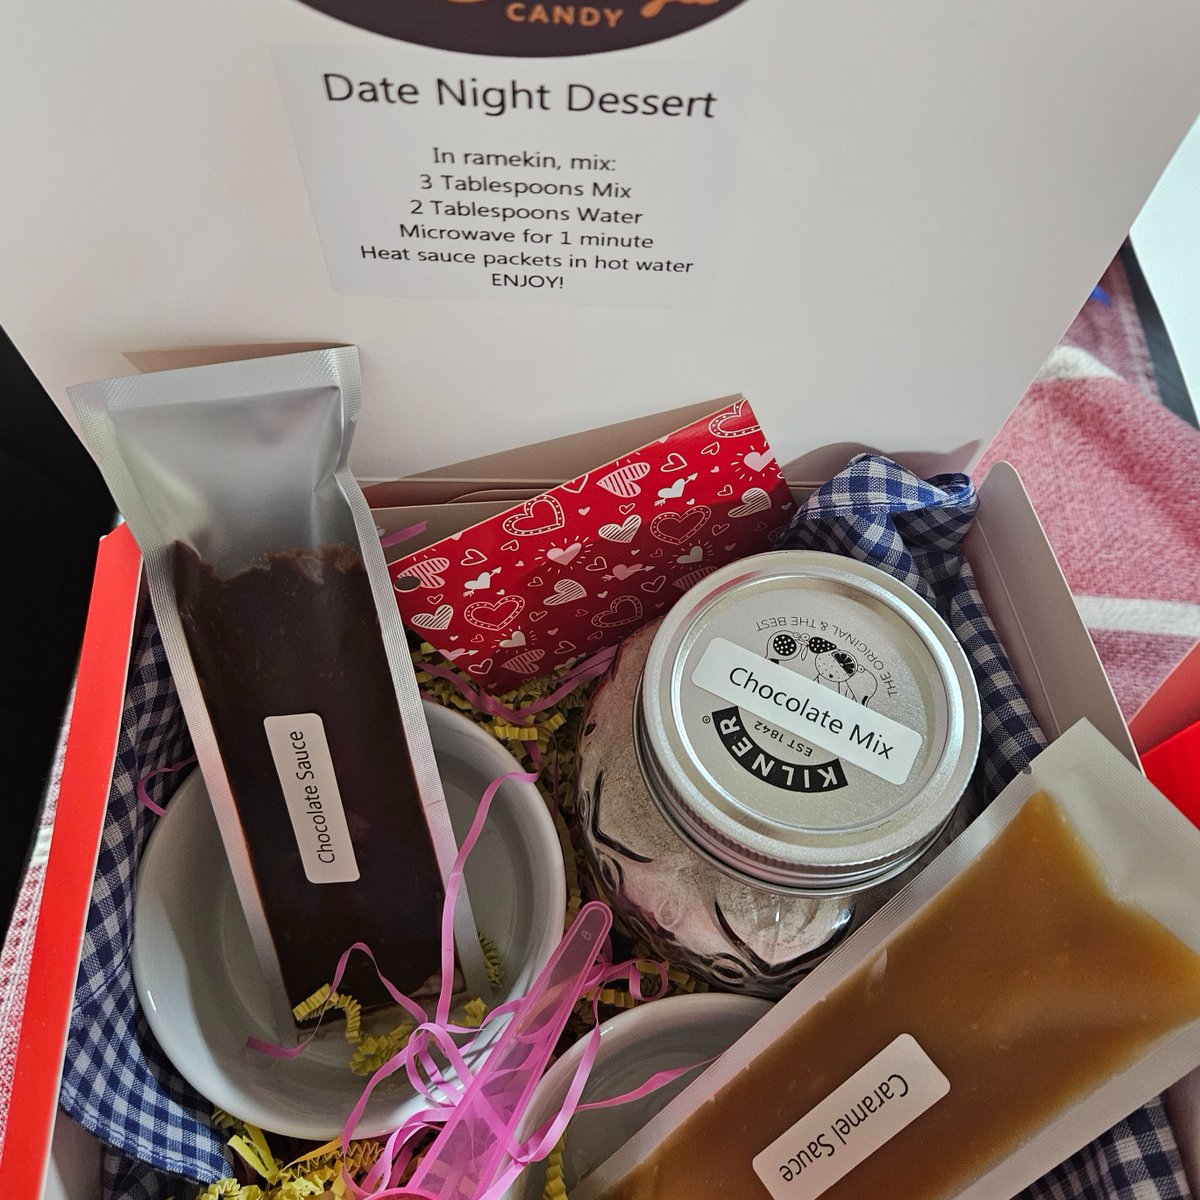 Looking for a quiet night in for Valentine's Day? Try our Date night boxes. Together you and your special someone mix, bake, and enjoy a tasty treat. Everything you need is in the box! Order your's today!#giftbasket #giftbox #chocolate #shoplocal #madeinoklahoma #valentines #love